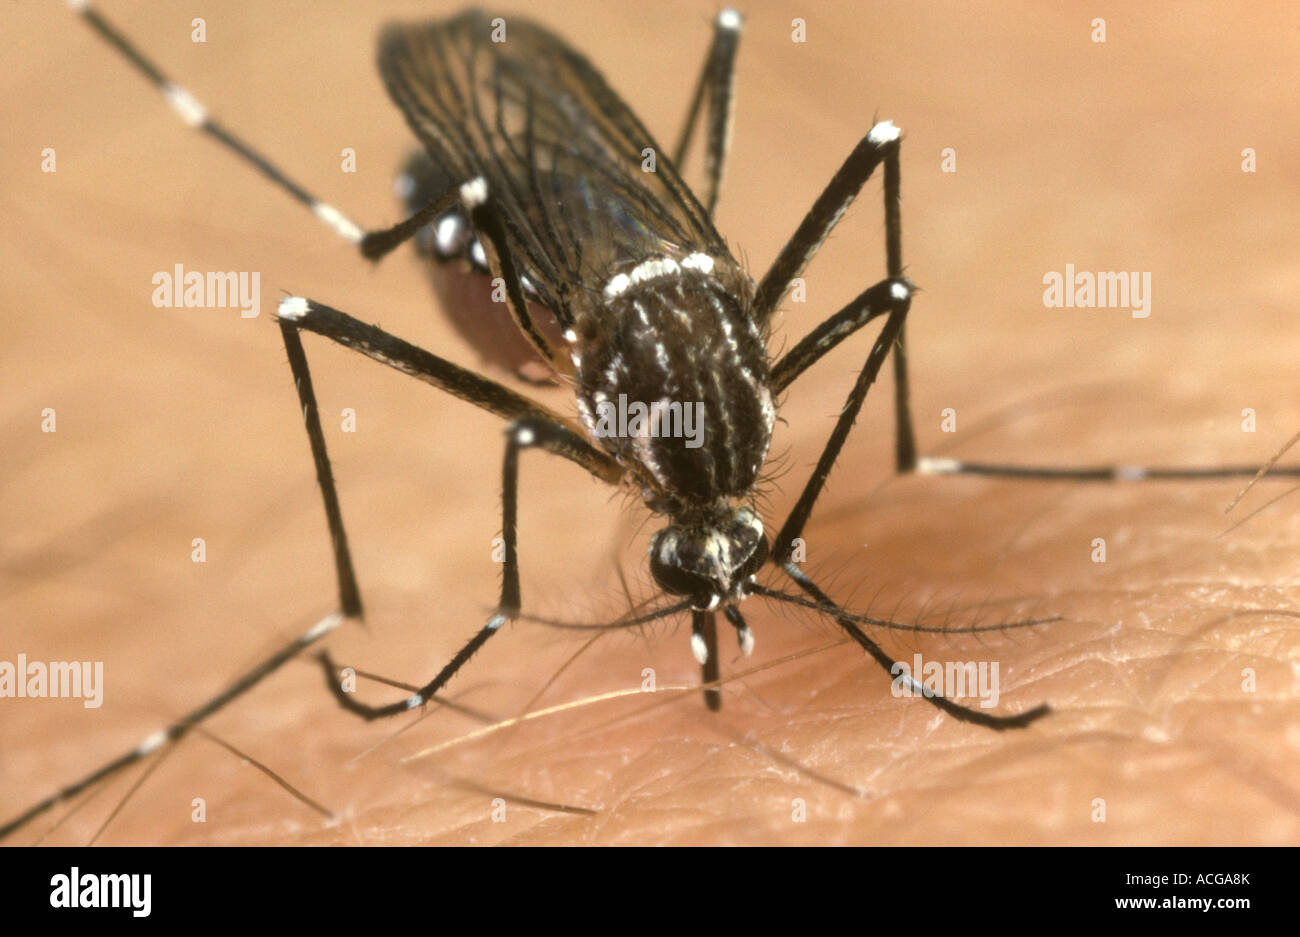 Yellow fever vector mosquito Aedes aegypti feeding on a human arm Stock Photo